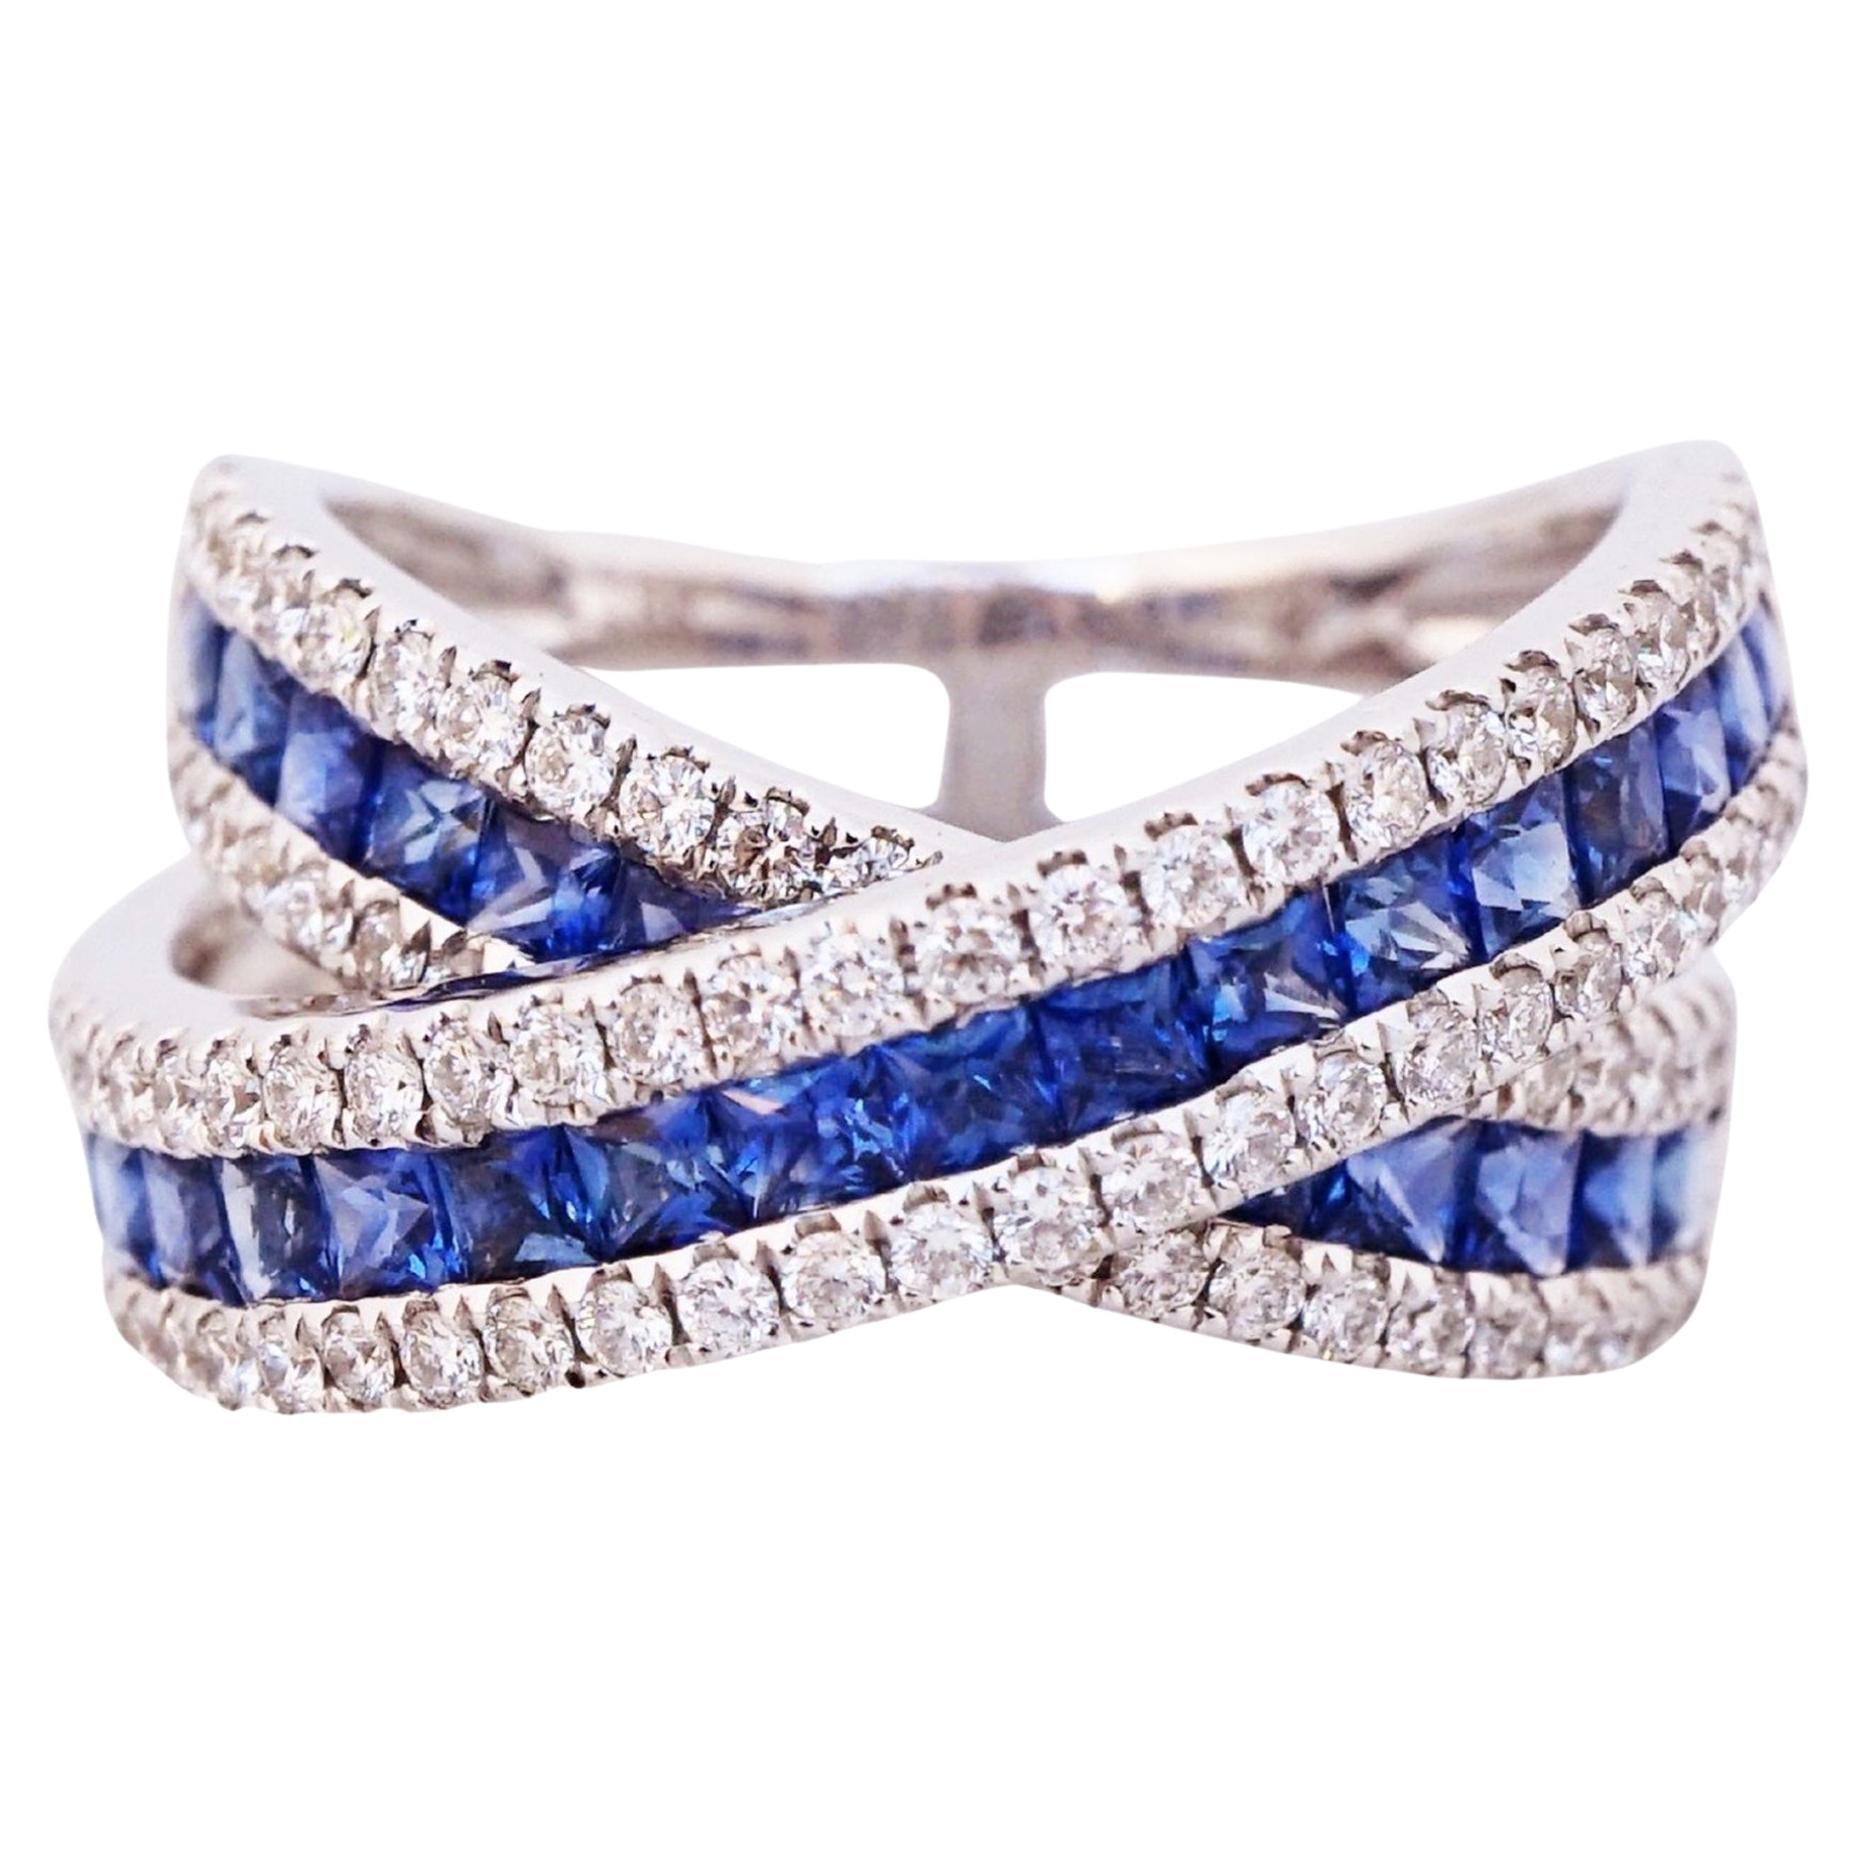 18k White Gold Crossover Ring with Diamonds and Sapphires